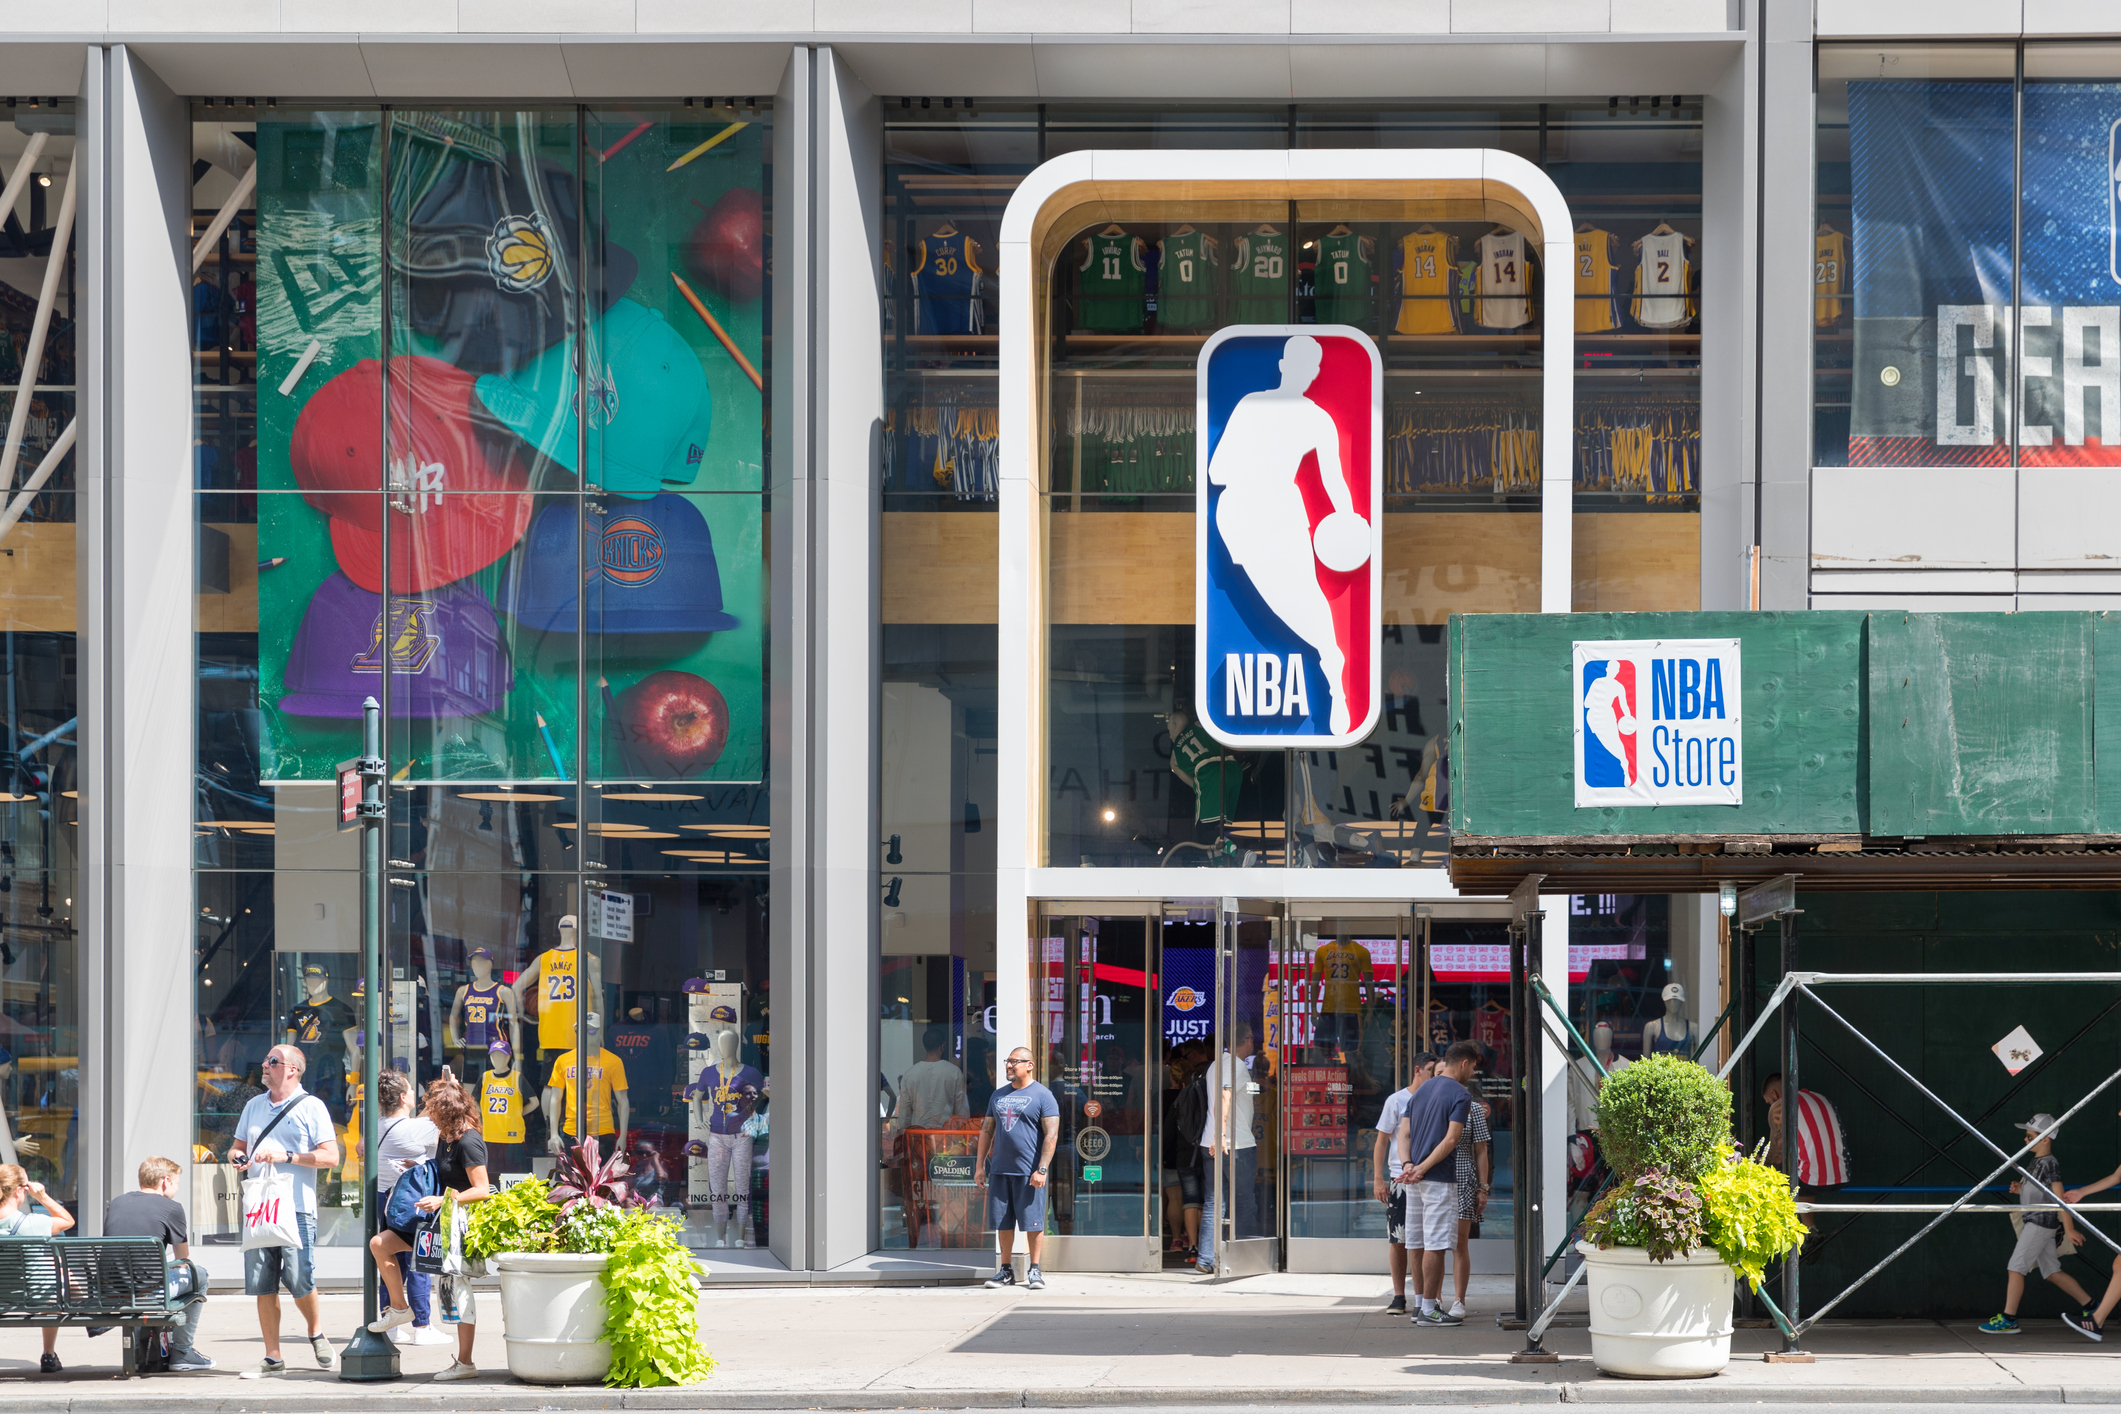 HBSAAA – The Business of the NBA (virtual) | www.hbscny.org